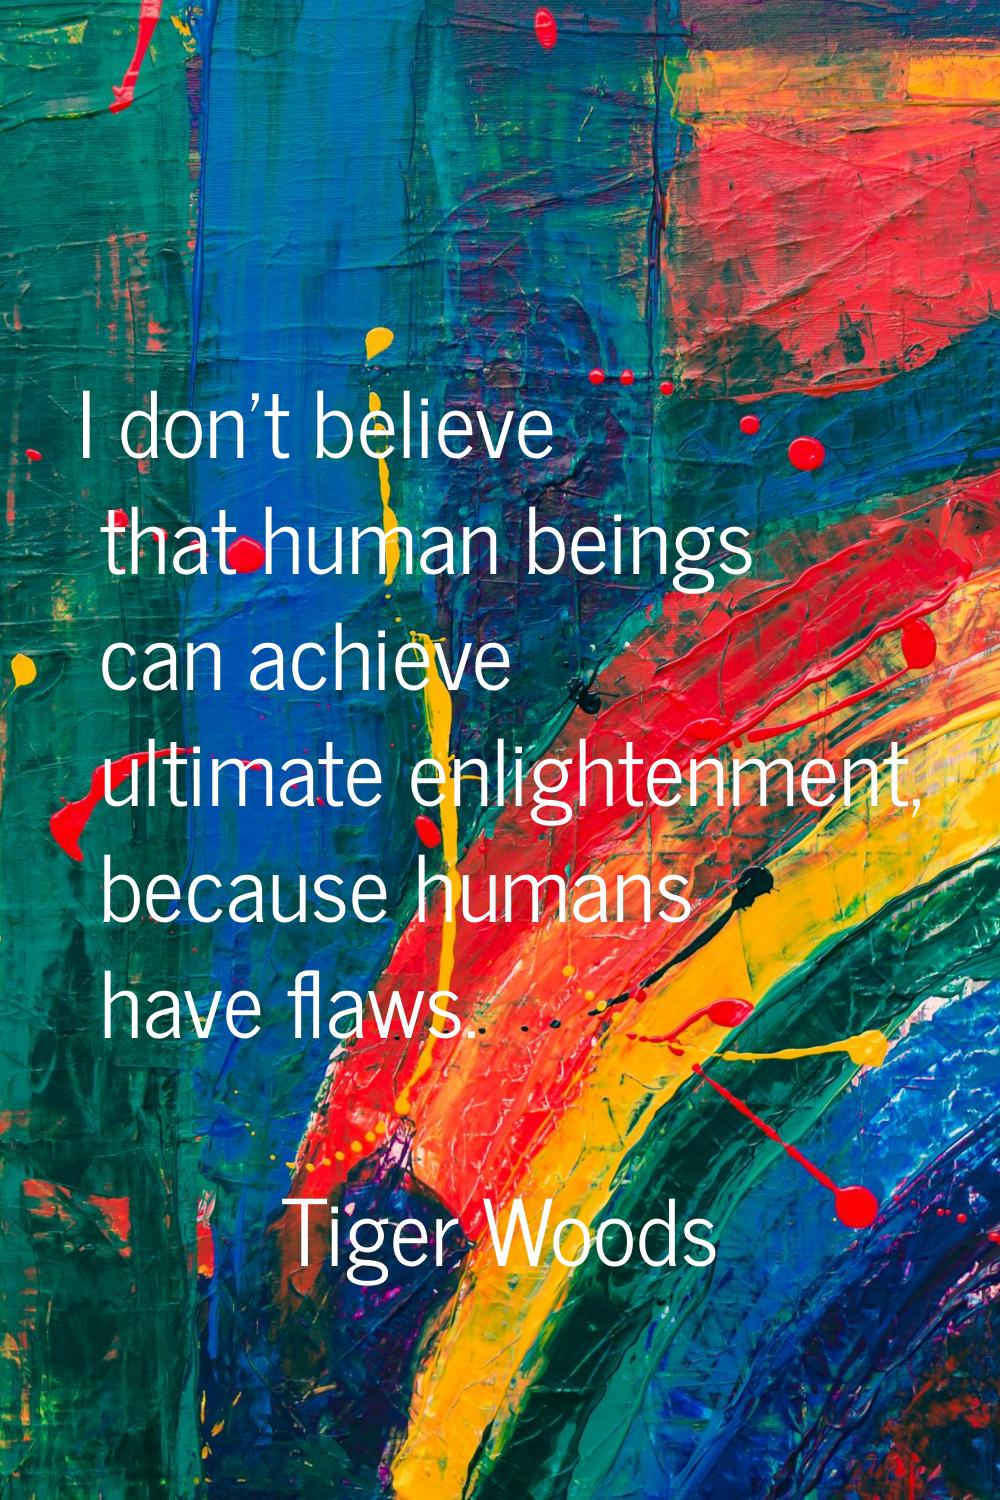 I don't believe that human beings can achieve ultimate enlightenment, because humans have flaws.